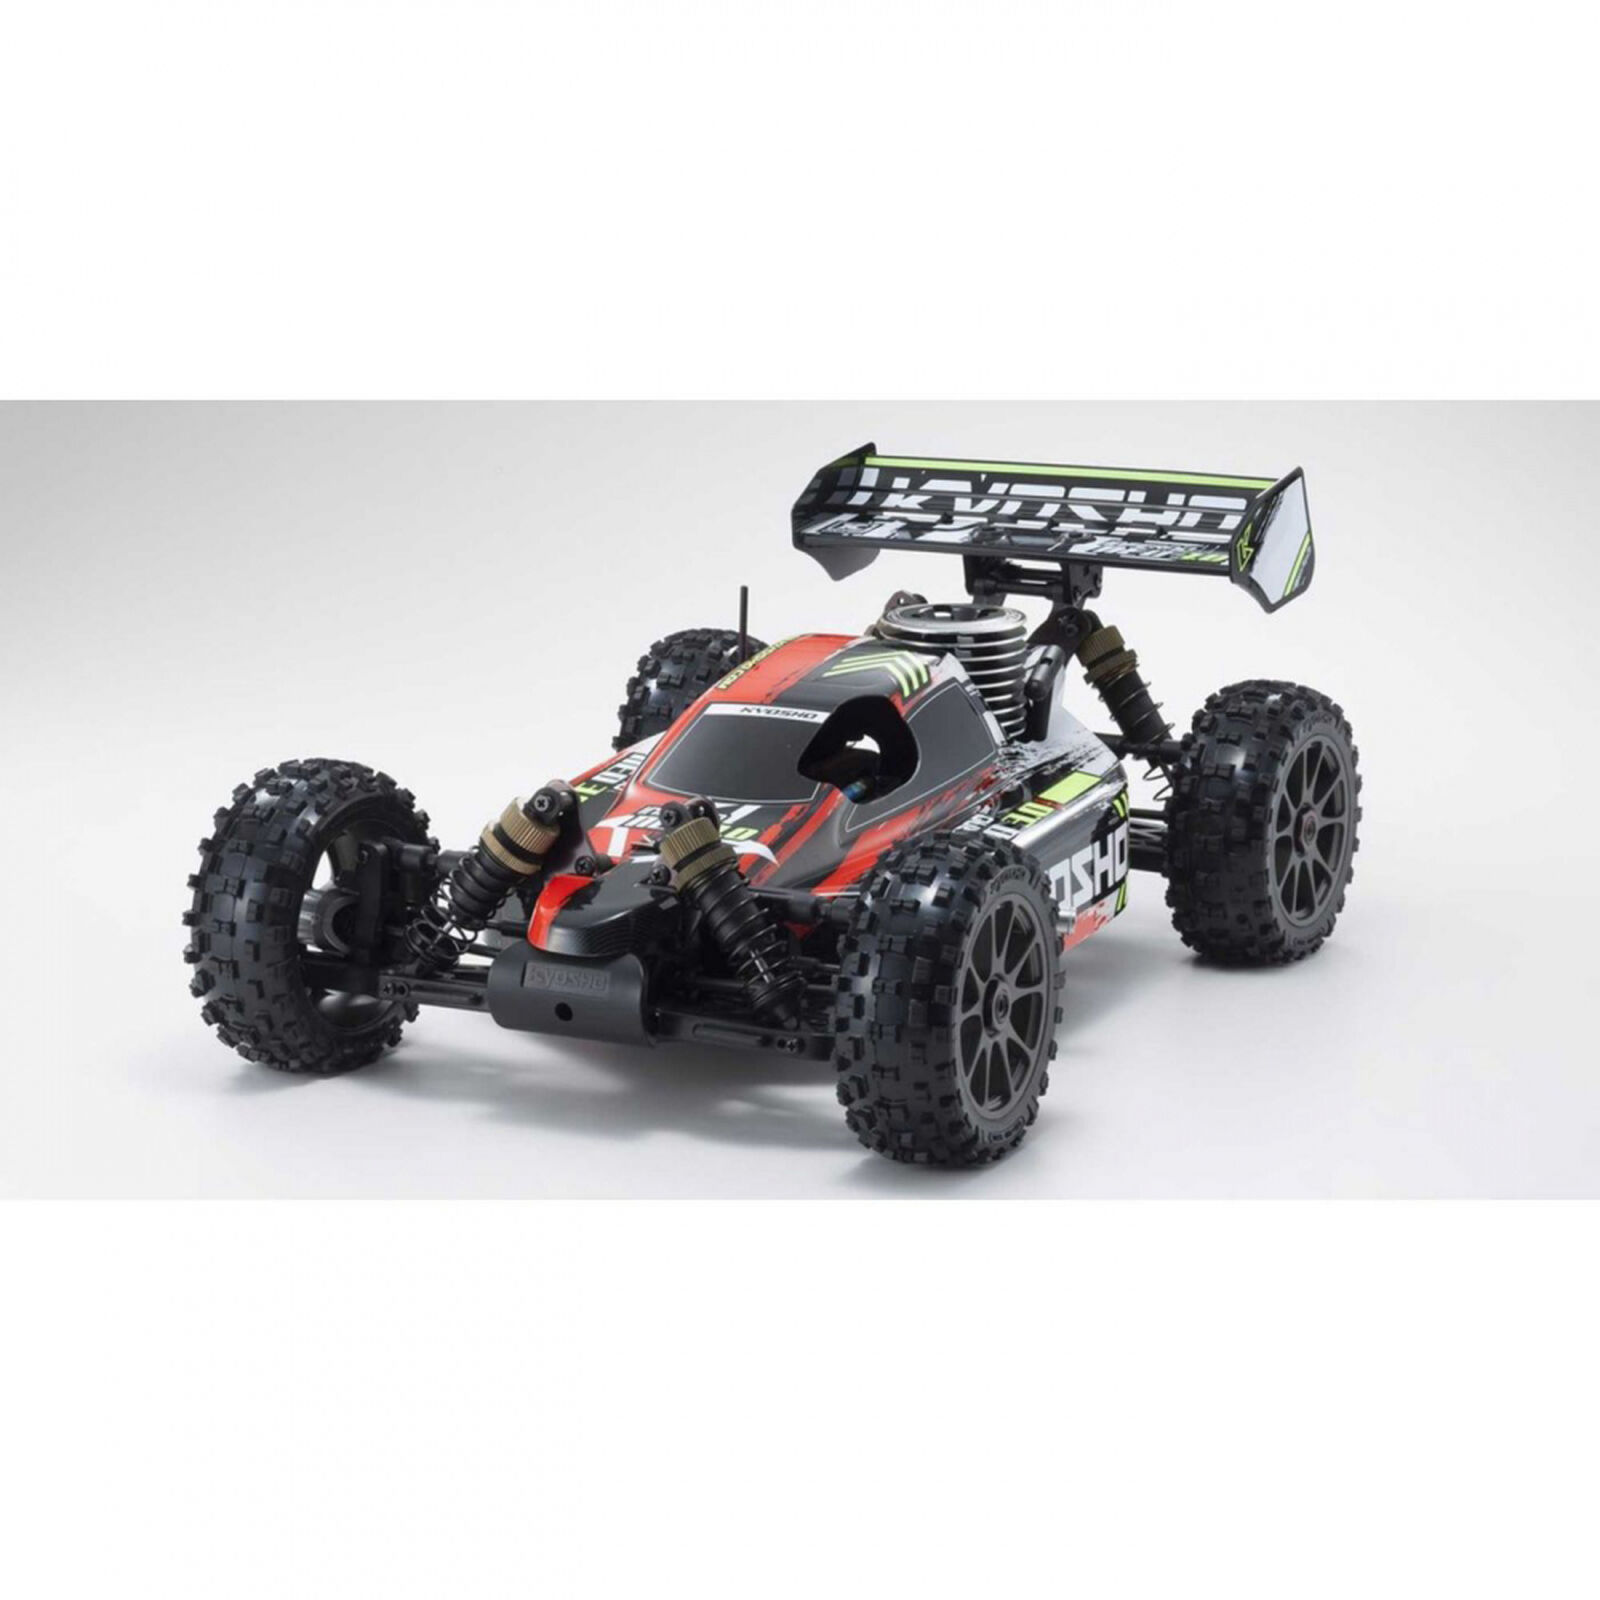 1/8 GP ReadySet INFERNO NEO 3.0 Type2 4WD Nitro Buggy RTR, Red